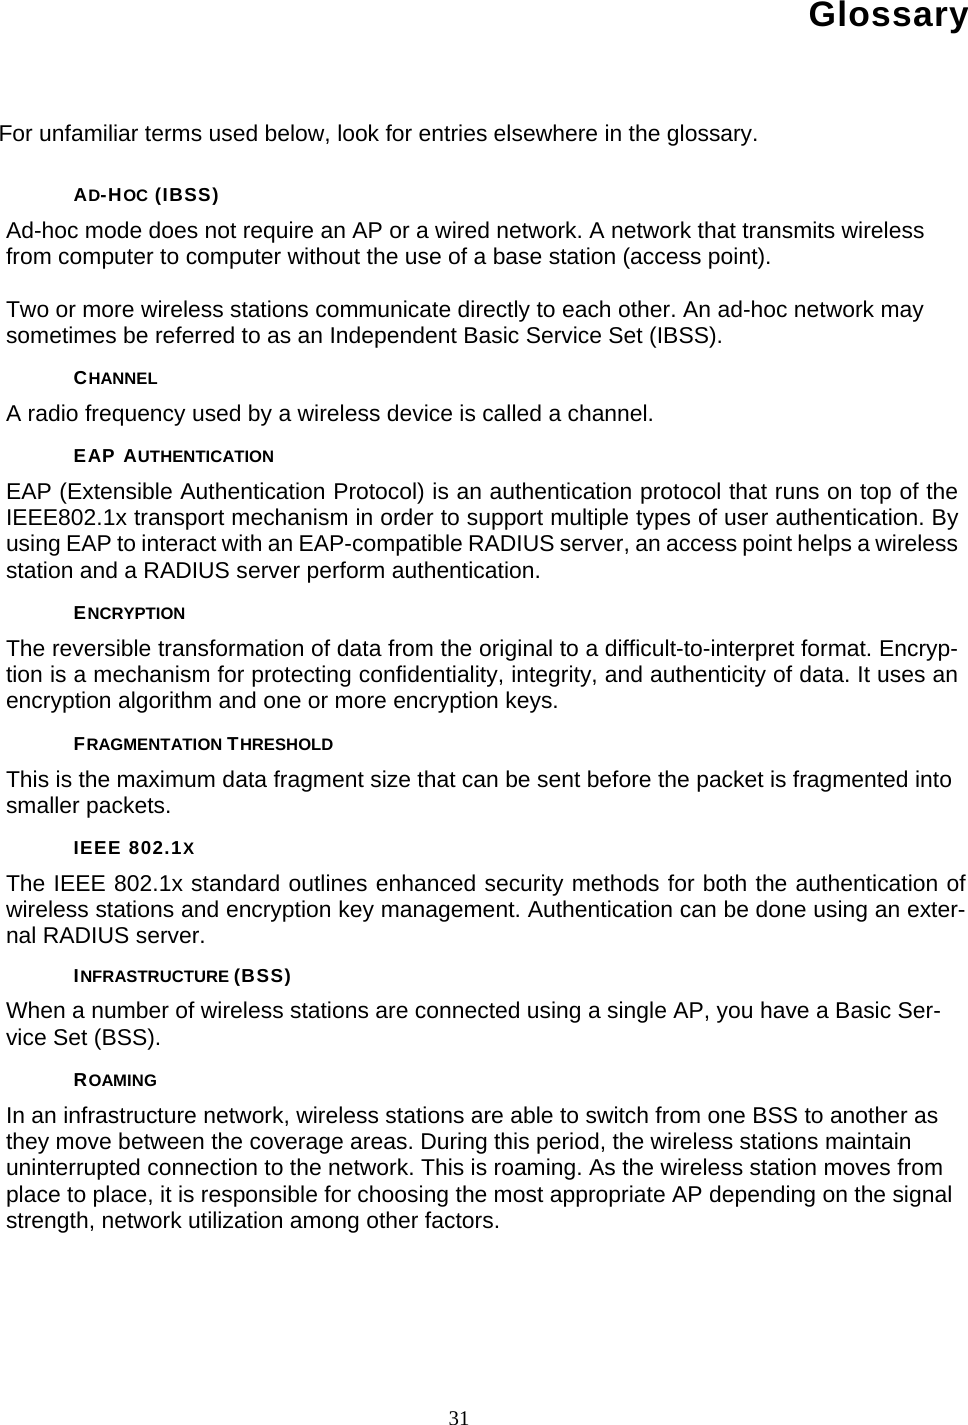       31 Glossary For unfamiliar terms used below, look for entries elsewhere in the glossary. AD-HOC (IBSS) Ad-hoc mode does not require an AP or a wired network. A network that transmits wireless from computer to computer without the use of a base station (access point).  Two or more wireless stations communicate directly to each other. An ad-hoc network may sometimes be referred to as an Independent Basic Service Set (IBSS). CHANNEL A radio frequency used by a wireless device is called a channel. EAP AUTHENTICATION EAP (Extensible Authentication Protocol) is an authentication protocol that runs on top of the IEEE802.1x transport mechanism in order to support multiple types of user authentication. By using EAP to interact with an EAP-compatible RADIUS server, an access point helps a wireless station and a RADIUS server perform authentication. ENCRYPTION The reversible transformation of data from the original to a difficult-to-interpret format. Encryp-tion is a mechanism for protecting confidentiality, integrity, and authenticity of data. It uses an encryption algorithm and one or more encryption keys. FRAGMENTATION THRESHOLD This is the maximum data fragment size that can be sent before the packet is fragmented into smaller packets. IEEE 802.1X The IEEE 802.1x standard outlines enhanced security methods for both the authentication of wireless stations and encryption key management. Authentication can be done using an exter-nal RADIUS server. INFRASTRUCTURE (BSS) When a number of wireless stations are connected using a single AP, you have a Basic Ser-vice Set (BSS). ROAMING In an infrastructure network, wireless stations are able to switch from one BSS to another as they move between the coverage areas. During this period, the wireless stations maintain uninterrupted connection to the network. This is roaming. As the wireless station moves from place to place, it is responsible for choosing the most appropriate AP depending on the signal strength, network utilization among other factors.     